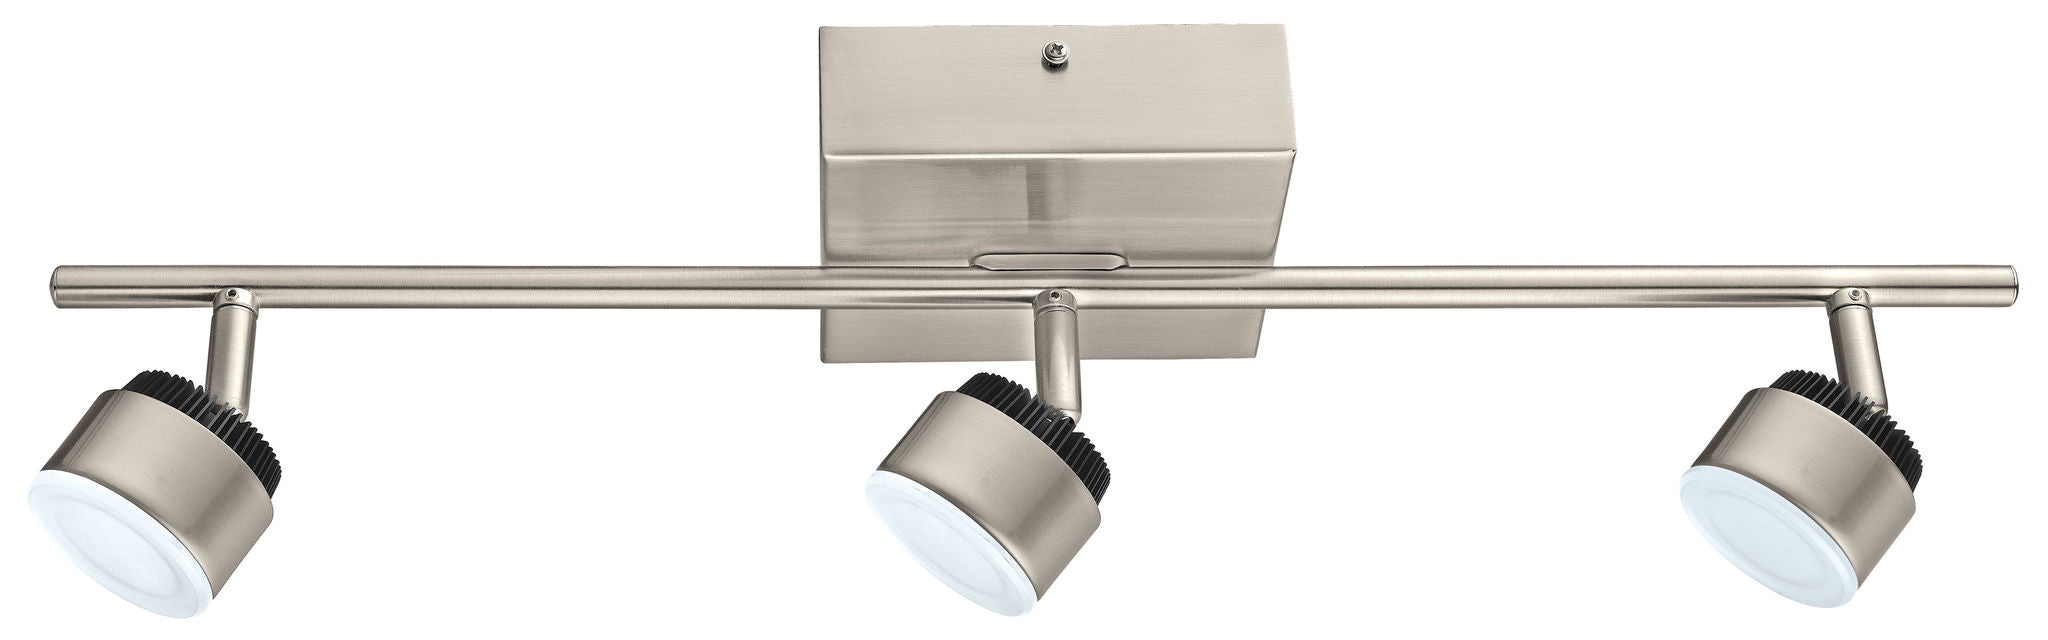 Armento 1 Spotlight Stainless steel INTEGRATED LED - 31483A | EGLO